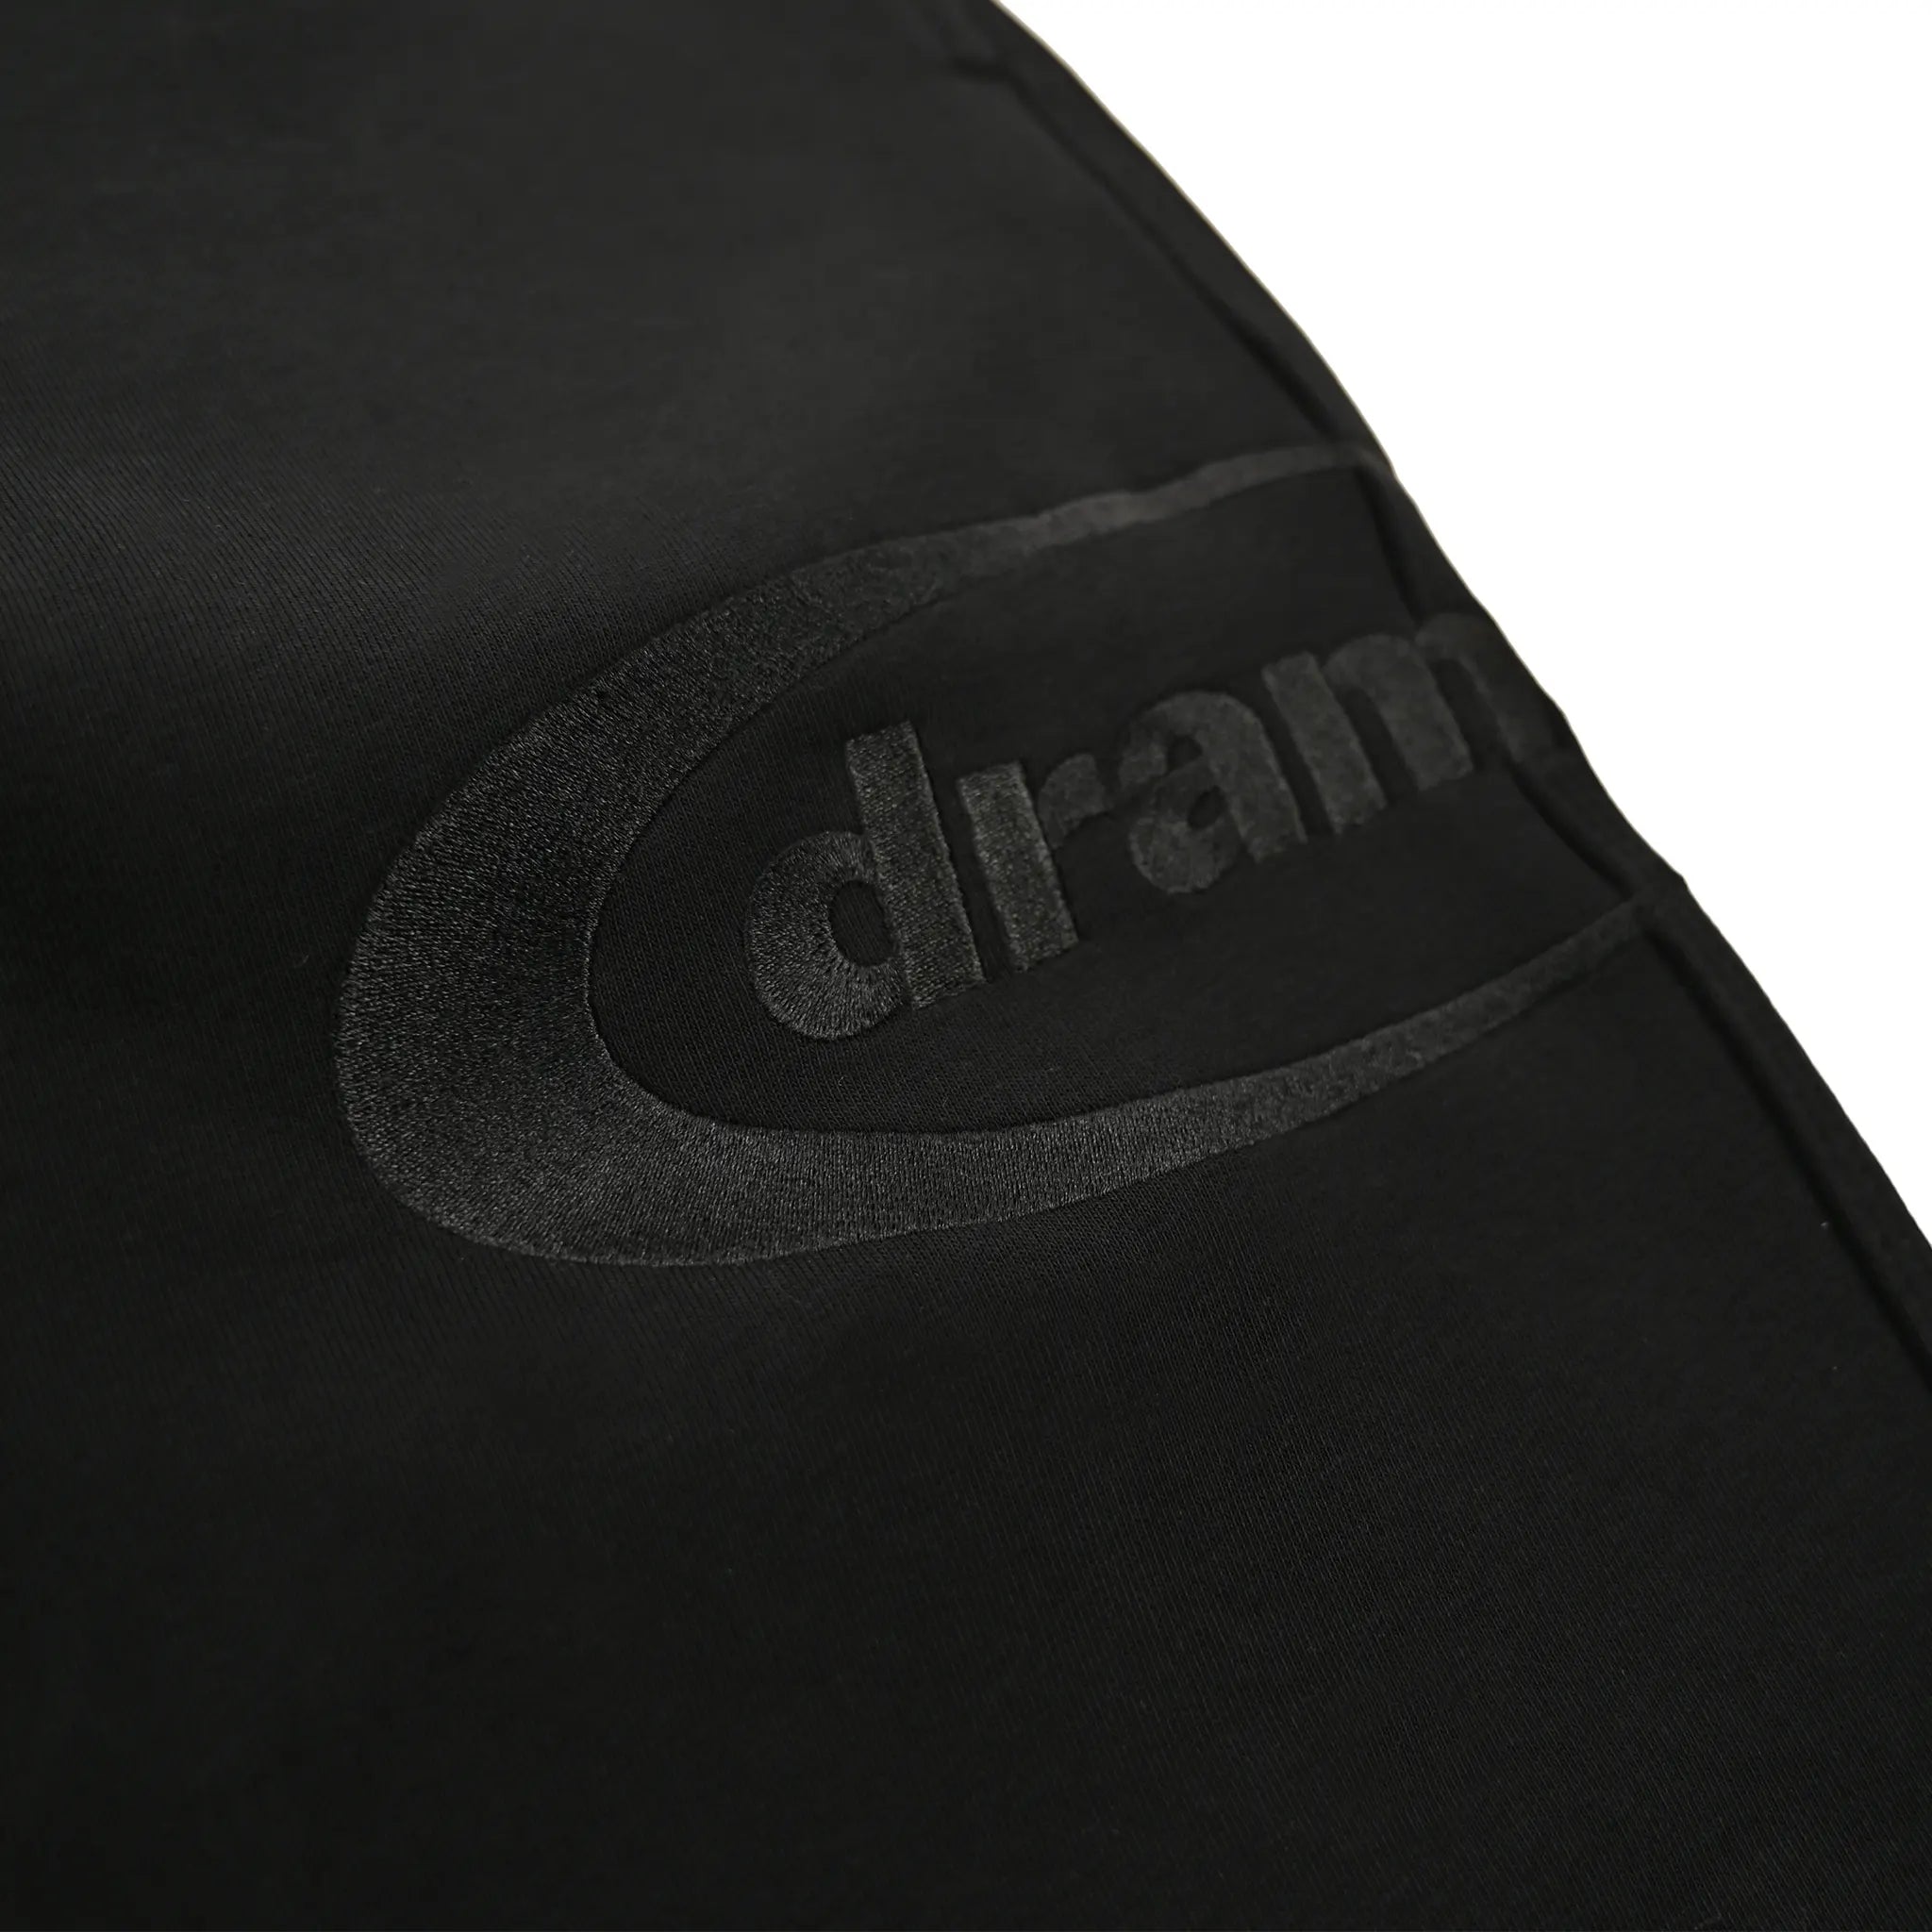 Detail view of Drama Call Oval Black Sweatpants